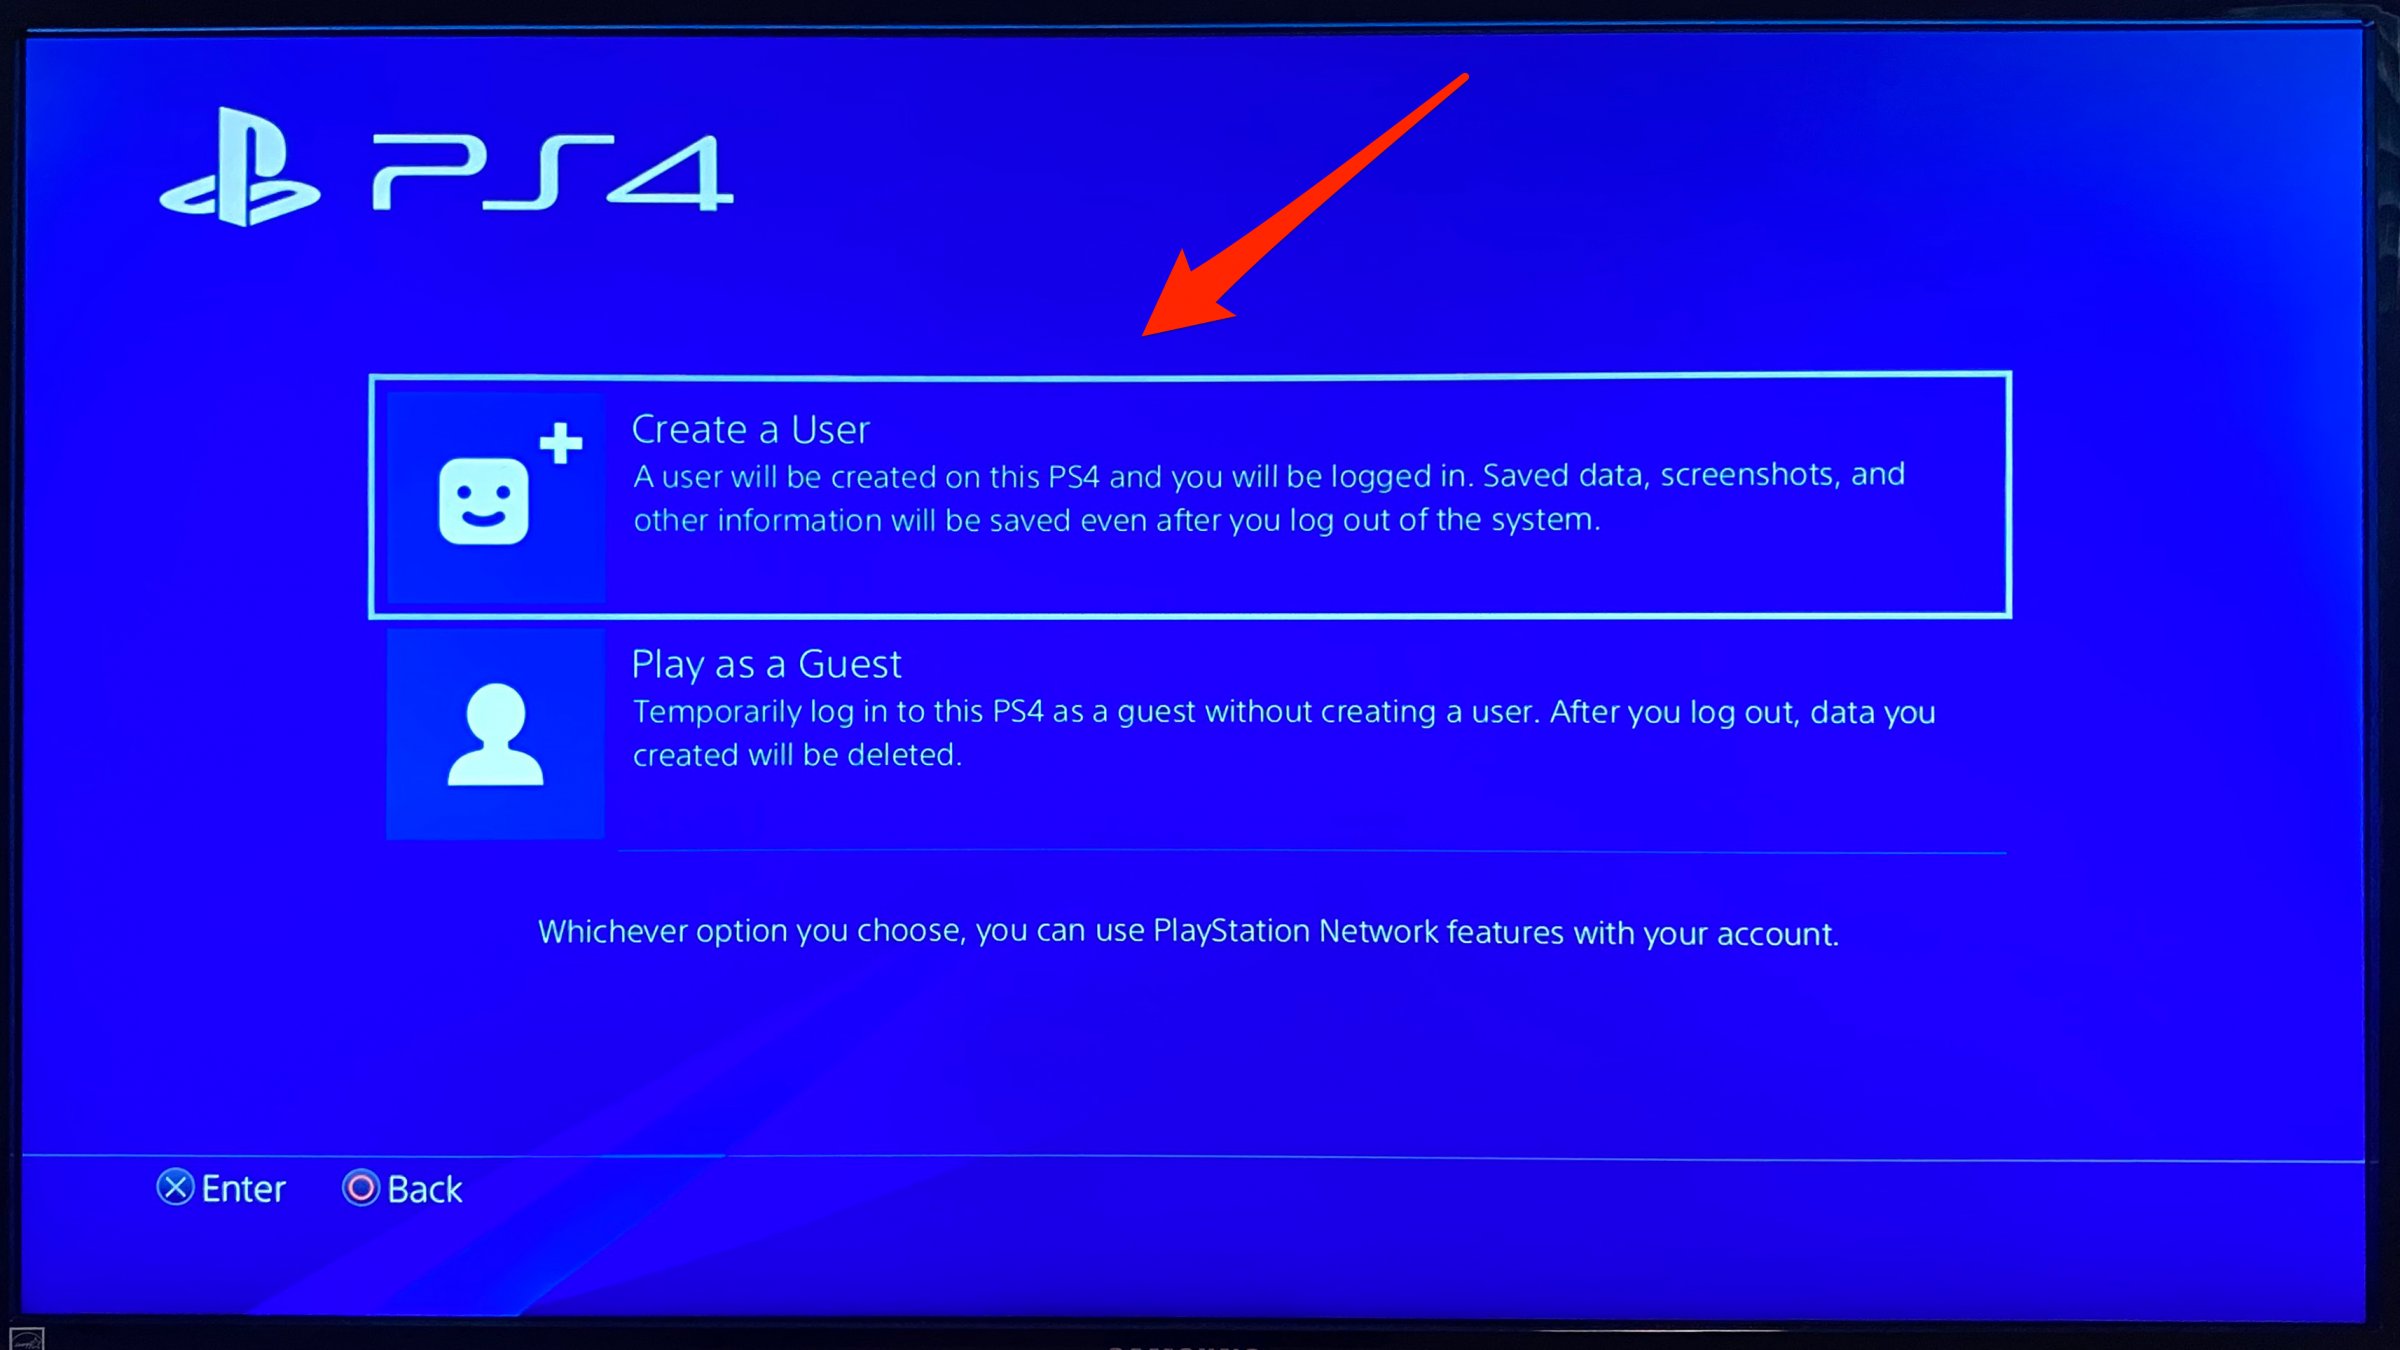 How to add an account on a PS4 from the login screen